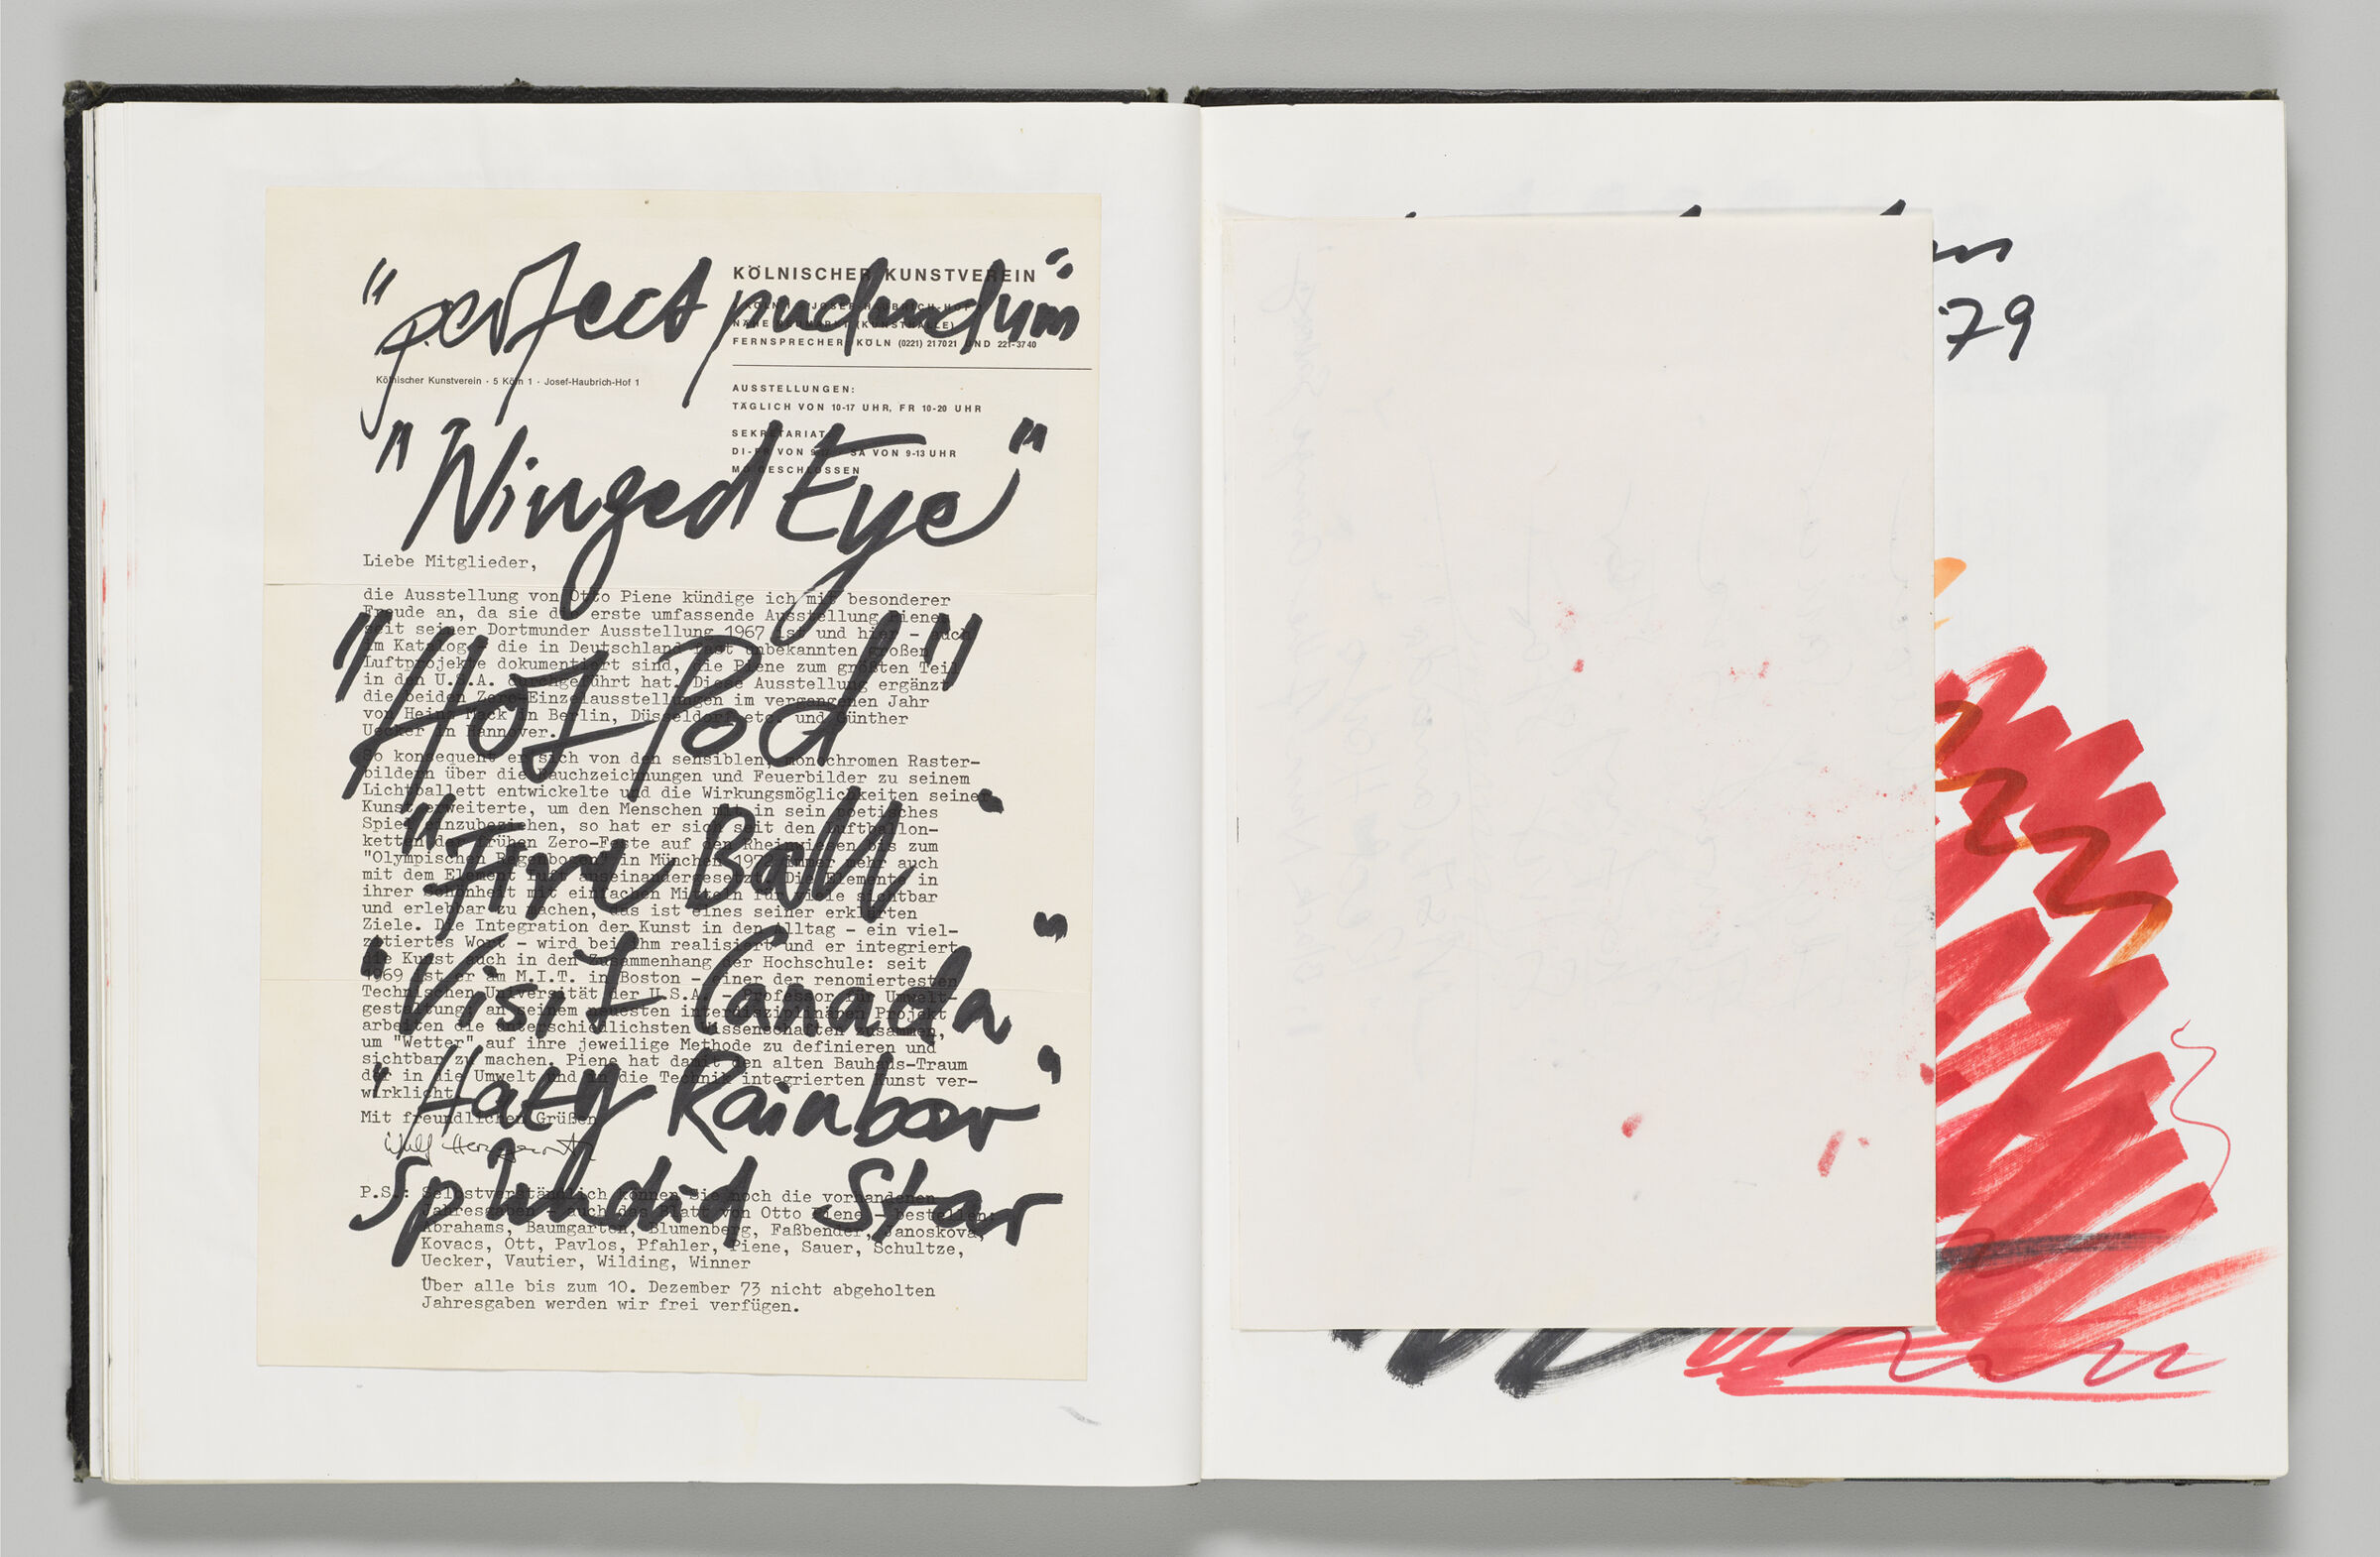 Untitled (Notes On Work Titles On Adhered Sheet, Left Page); Untitled (Notes On Work Titles On Adhered Sheet, Right Page)